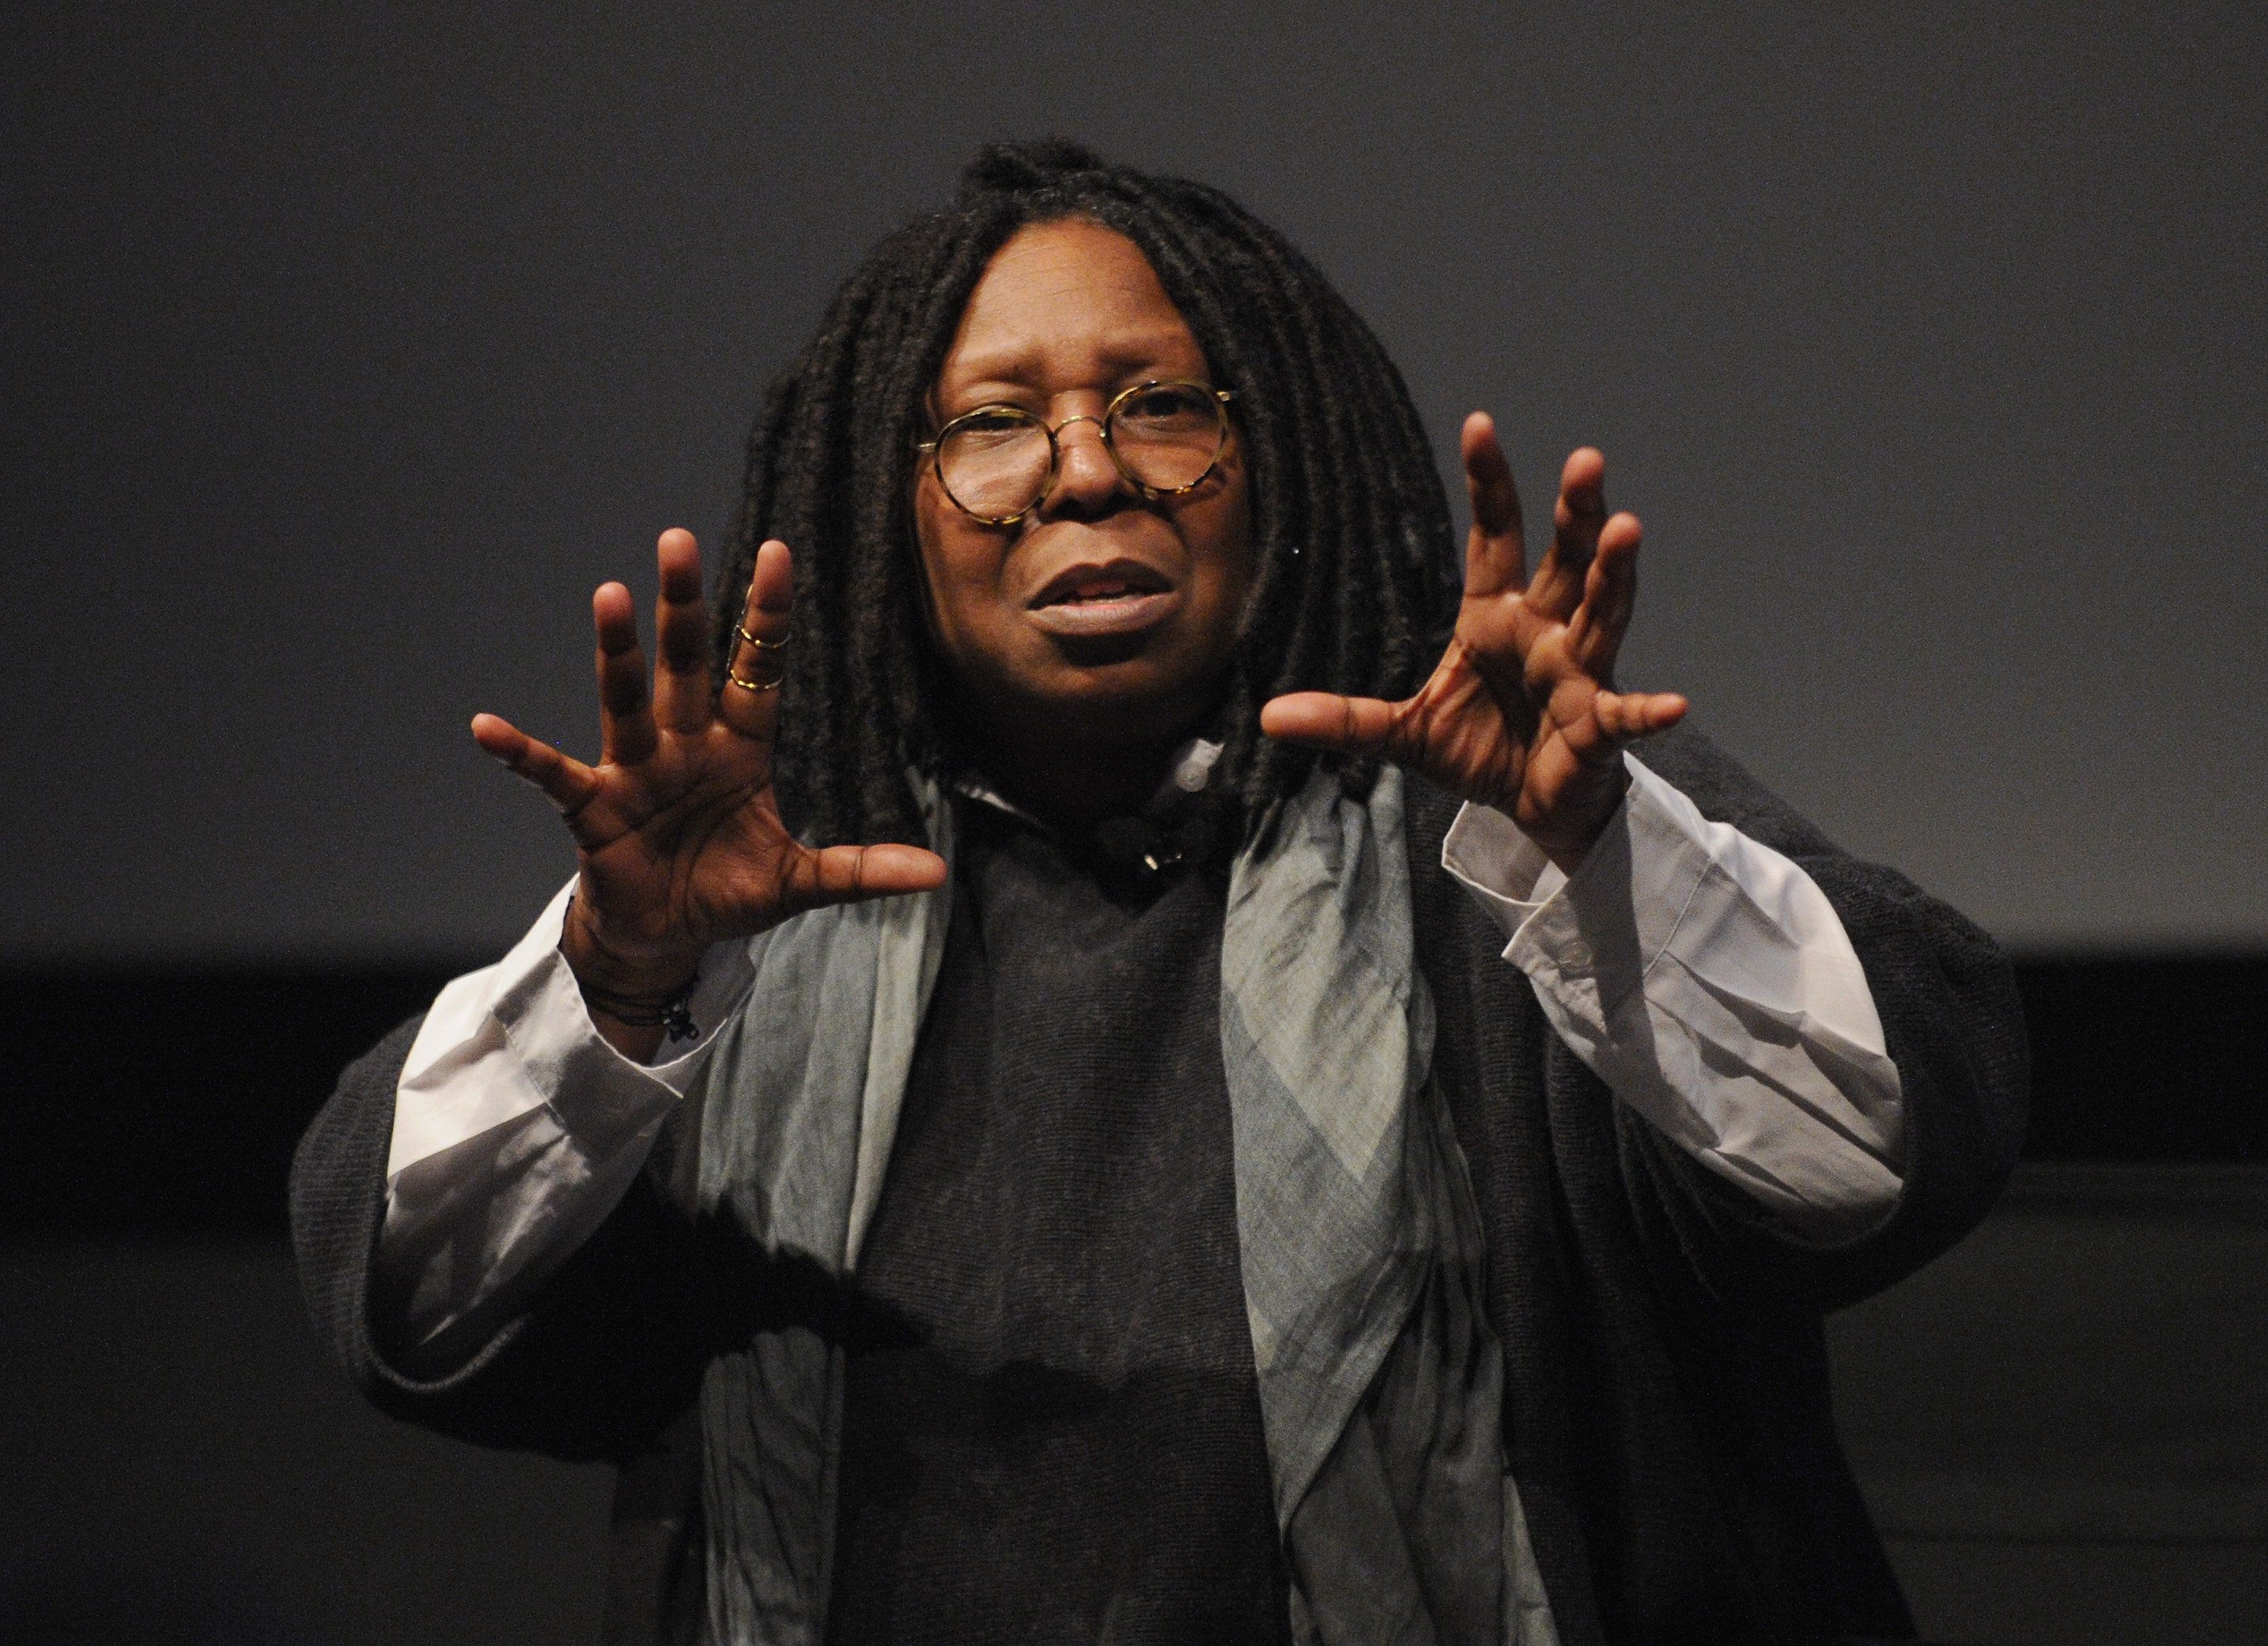 Whoopi Goldberg speaks during "I Got Somethin' To Tell You" screening and Q+A with Director Whoopi Goldberg exclusively for American Express cardmembers at SVA Theatre 1 on April 22, 2013 | Photo: GettyImages